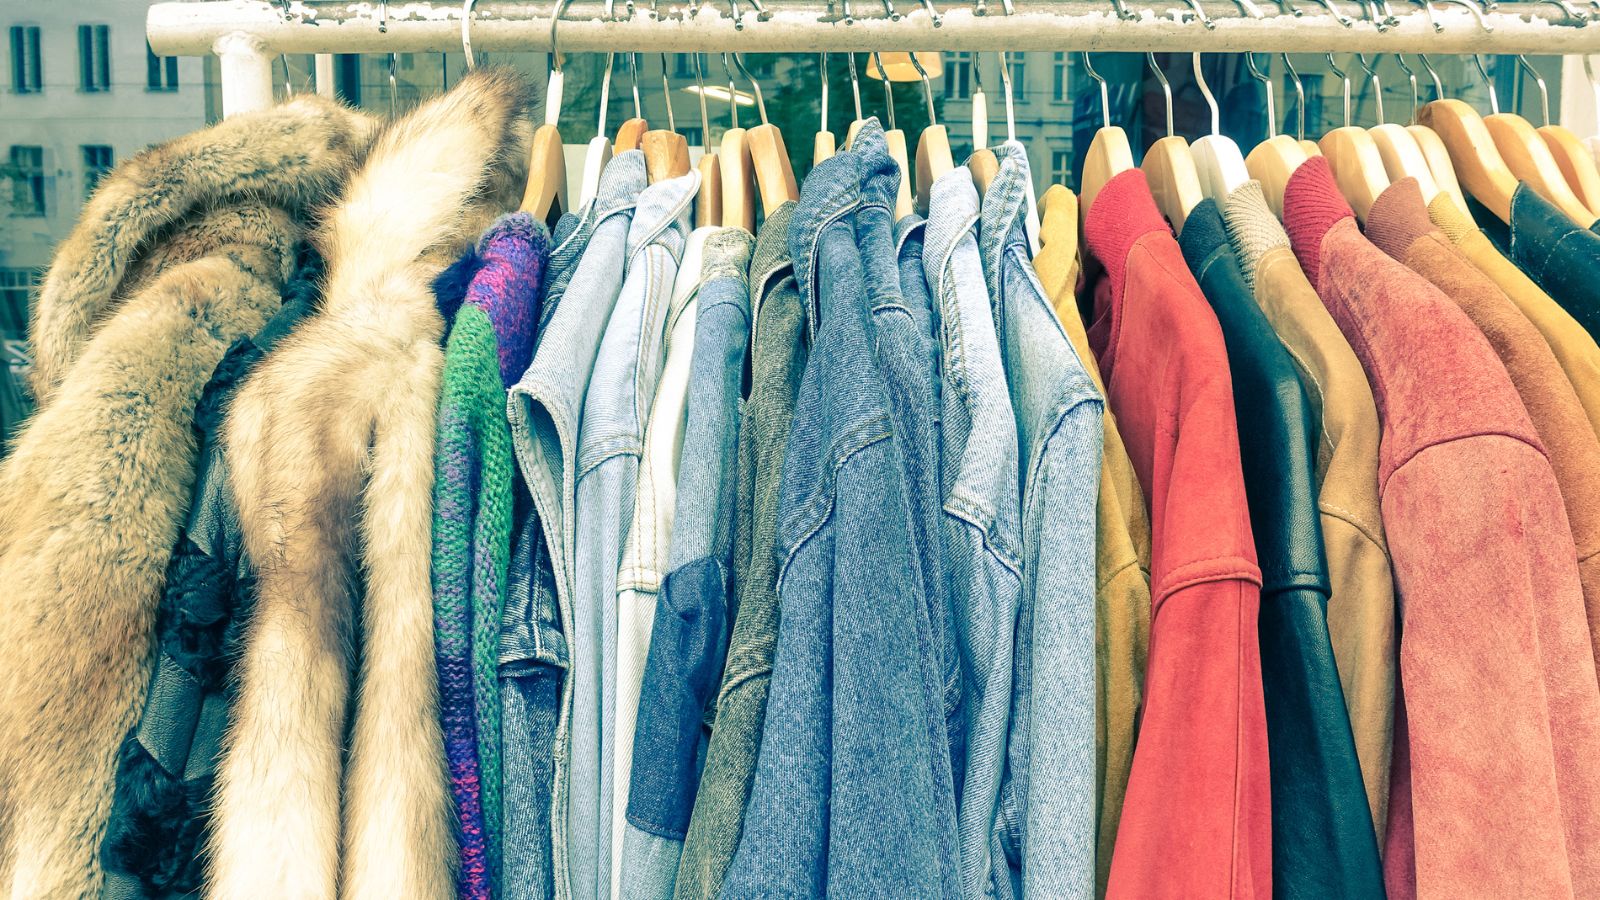 12 Things People Say They Will Never Buy Even If They Have The Money